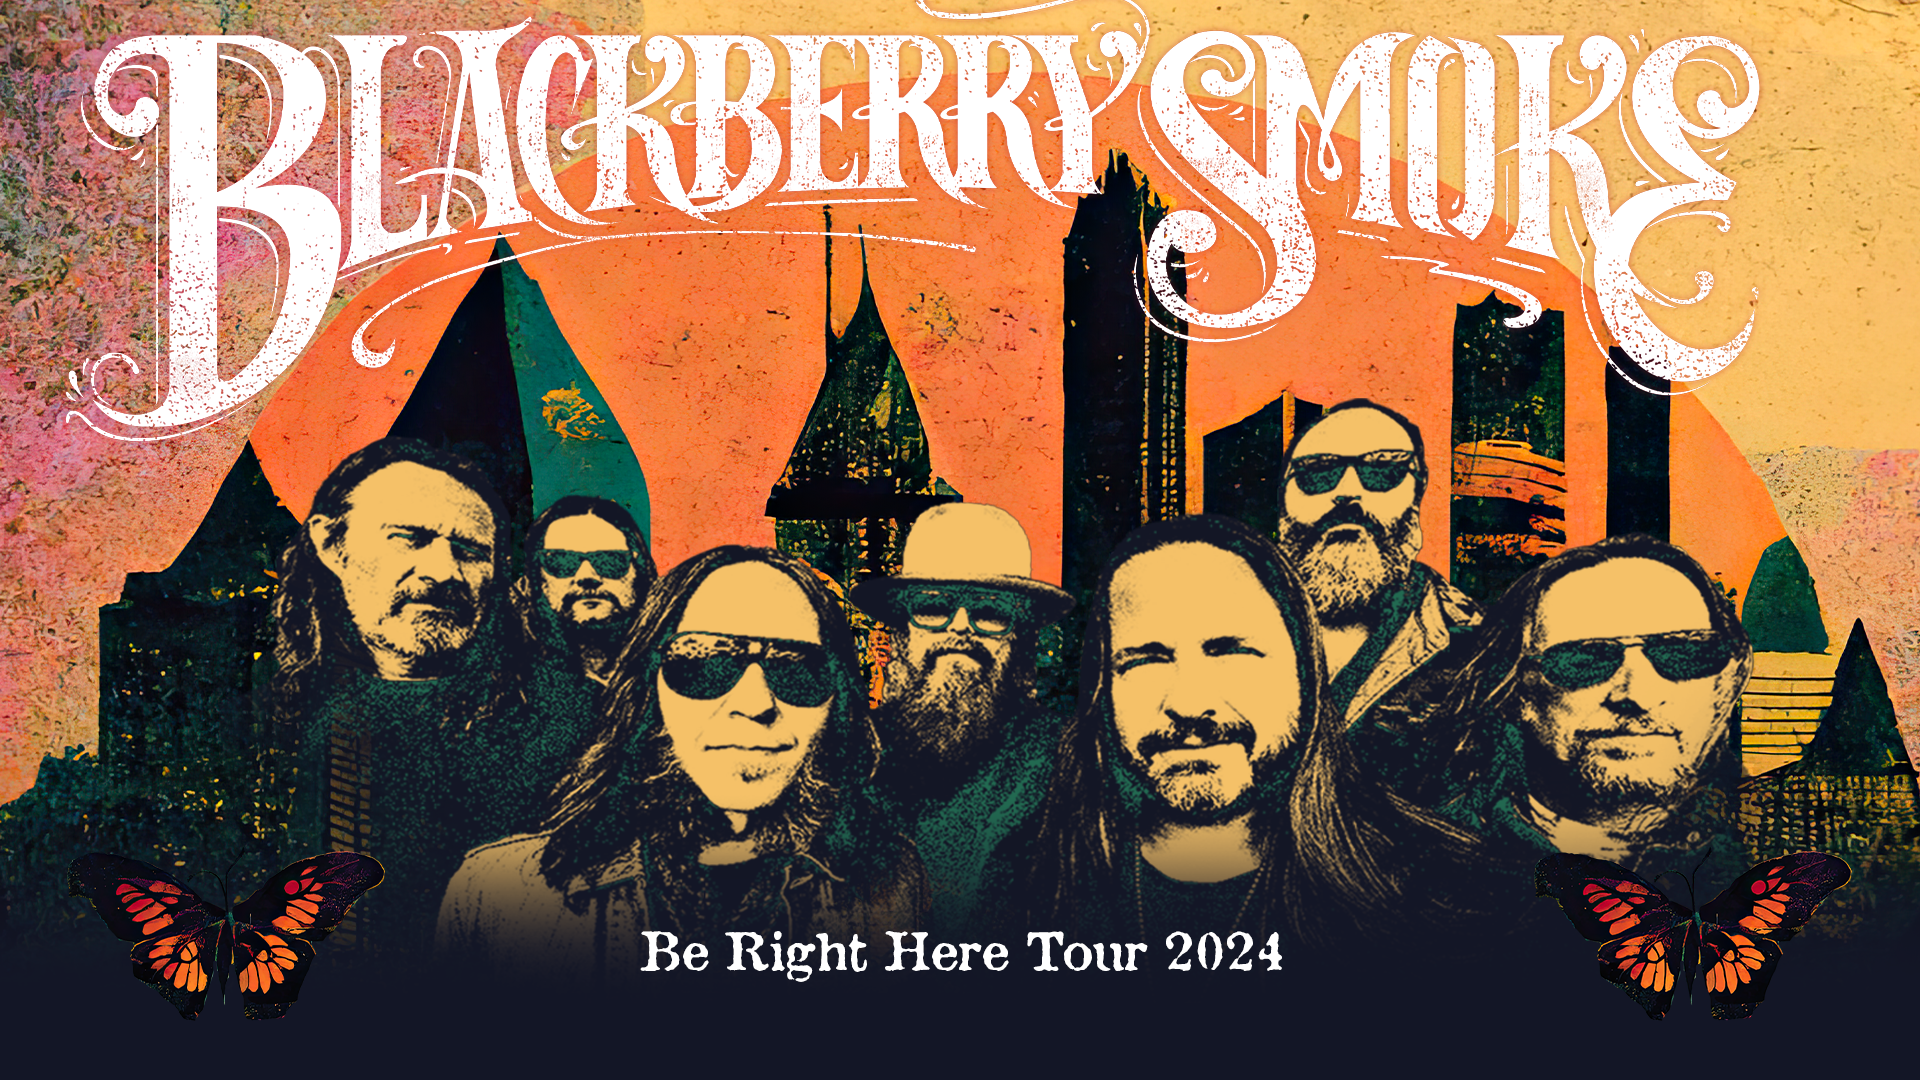 Blackberry Smoke: Be Right Here Tour 2024